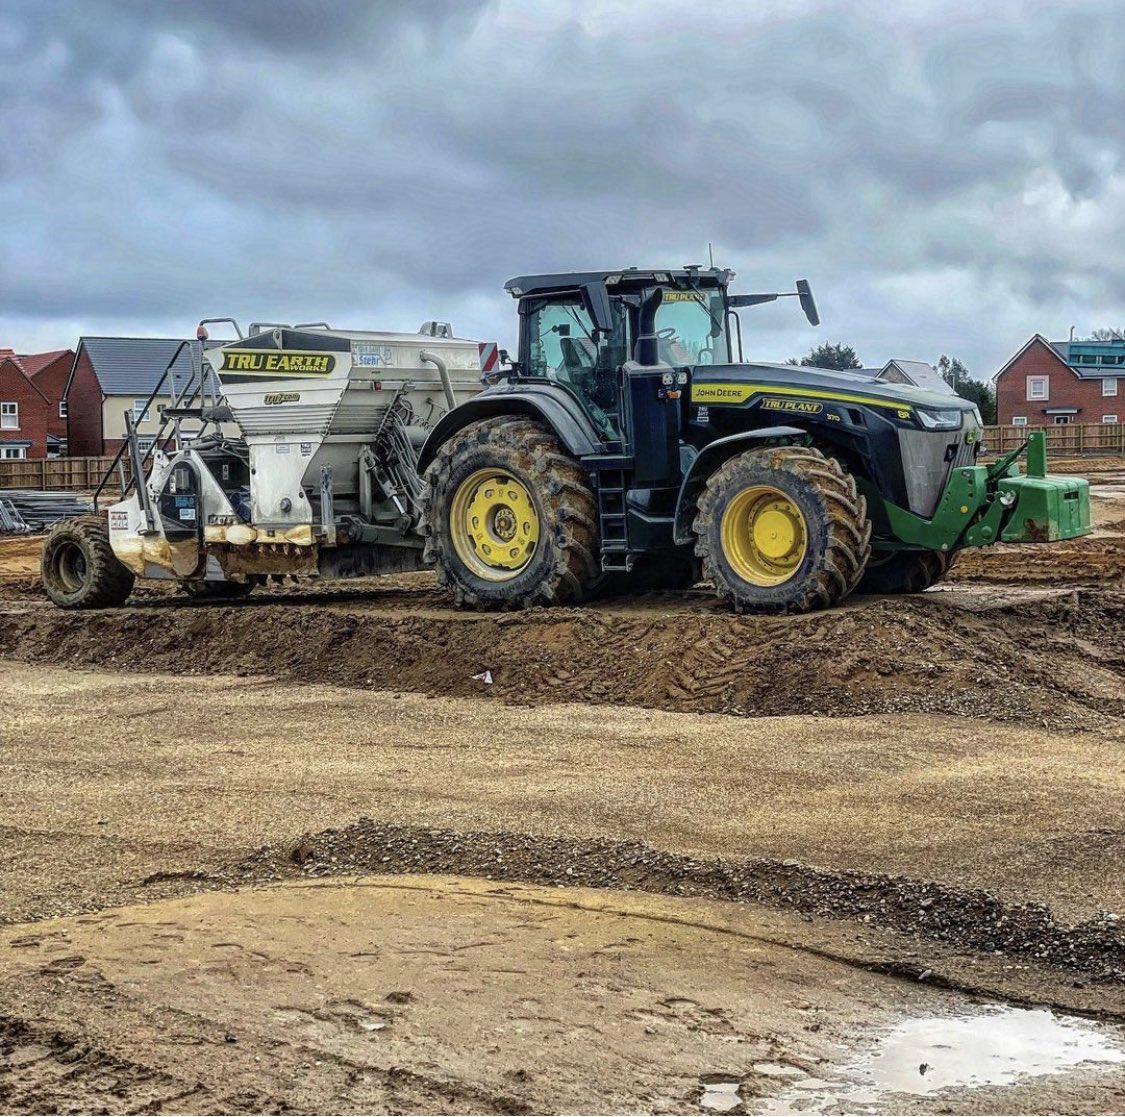 Nice to see this big girl at work #8R370 

Email jake@tru7.com for more info 

#Farming #TractorHire #Agriculture #JohnDeere #6R215 #SuffolkFarming  #BackBritishFarming #agtwitter #agrichat #clubhectare #Tru7Group